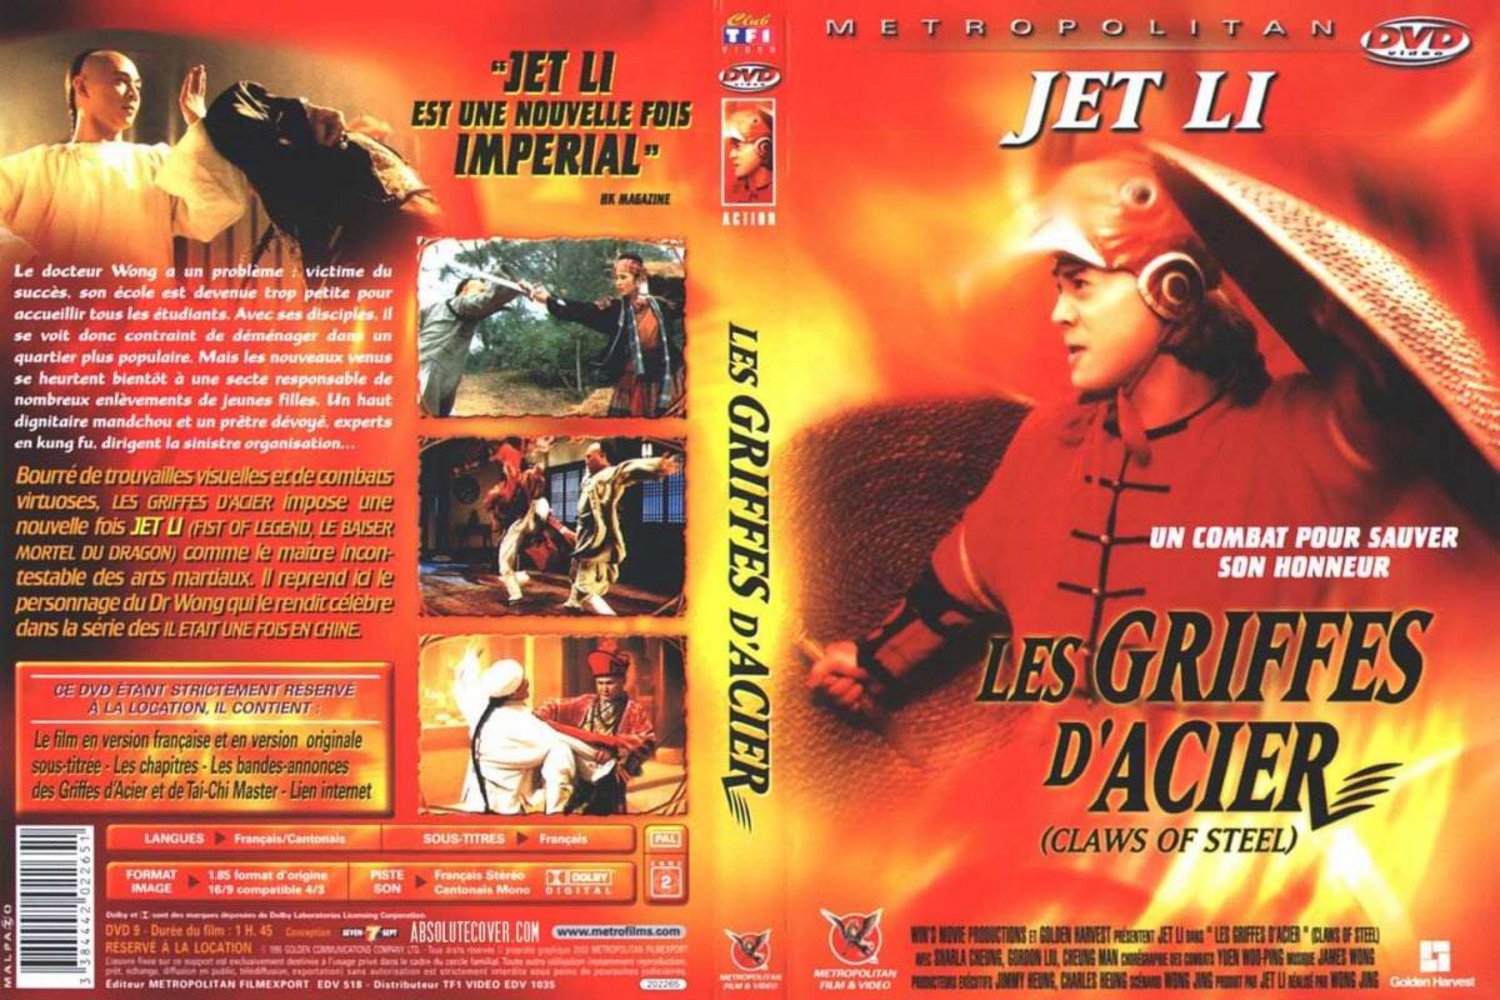 Jaquette DVD il etait en chine 4 Claws Of Steel French-front